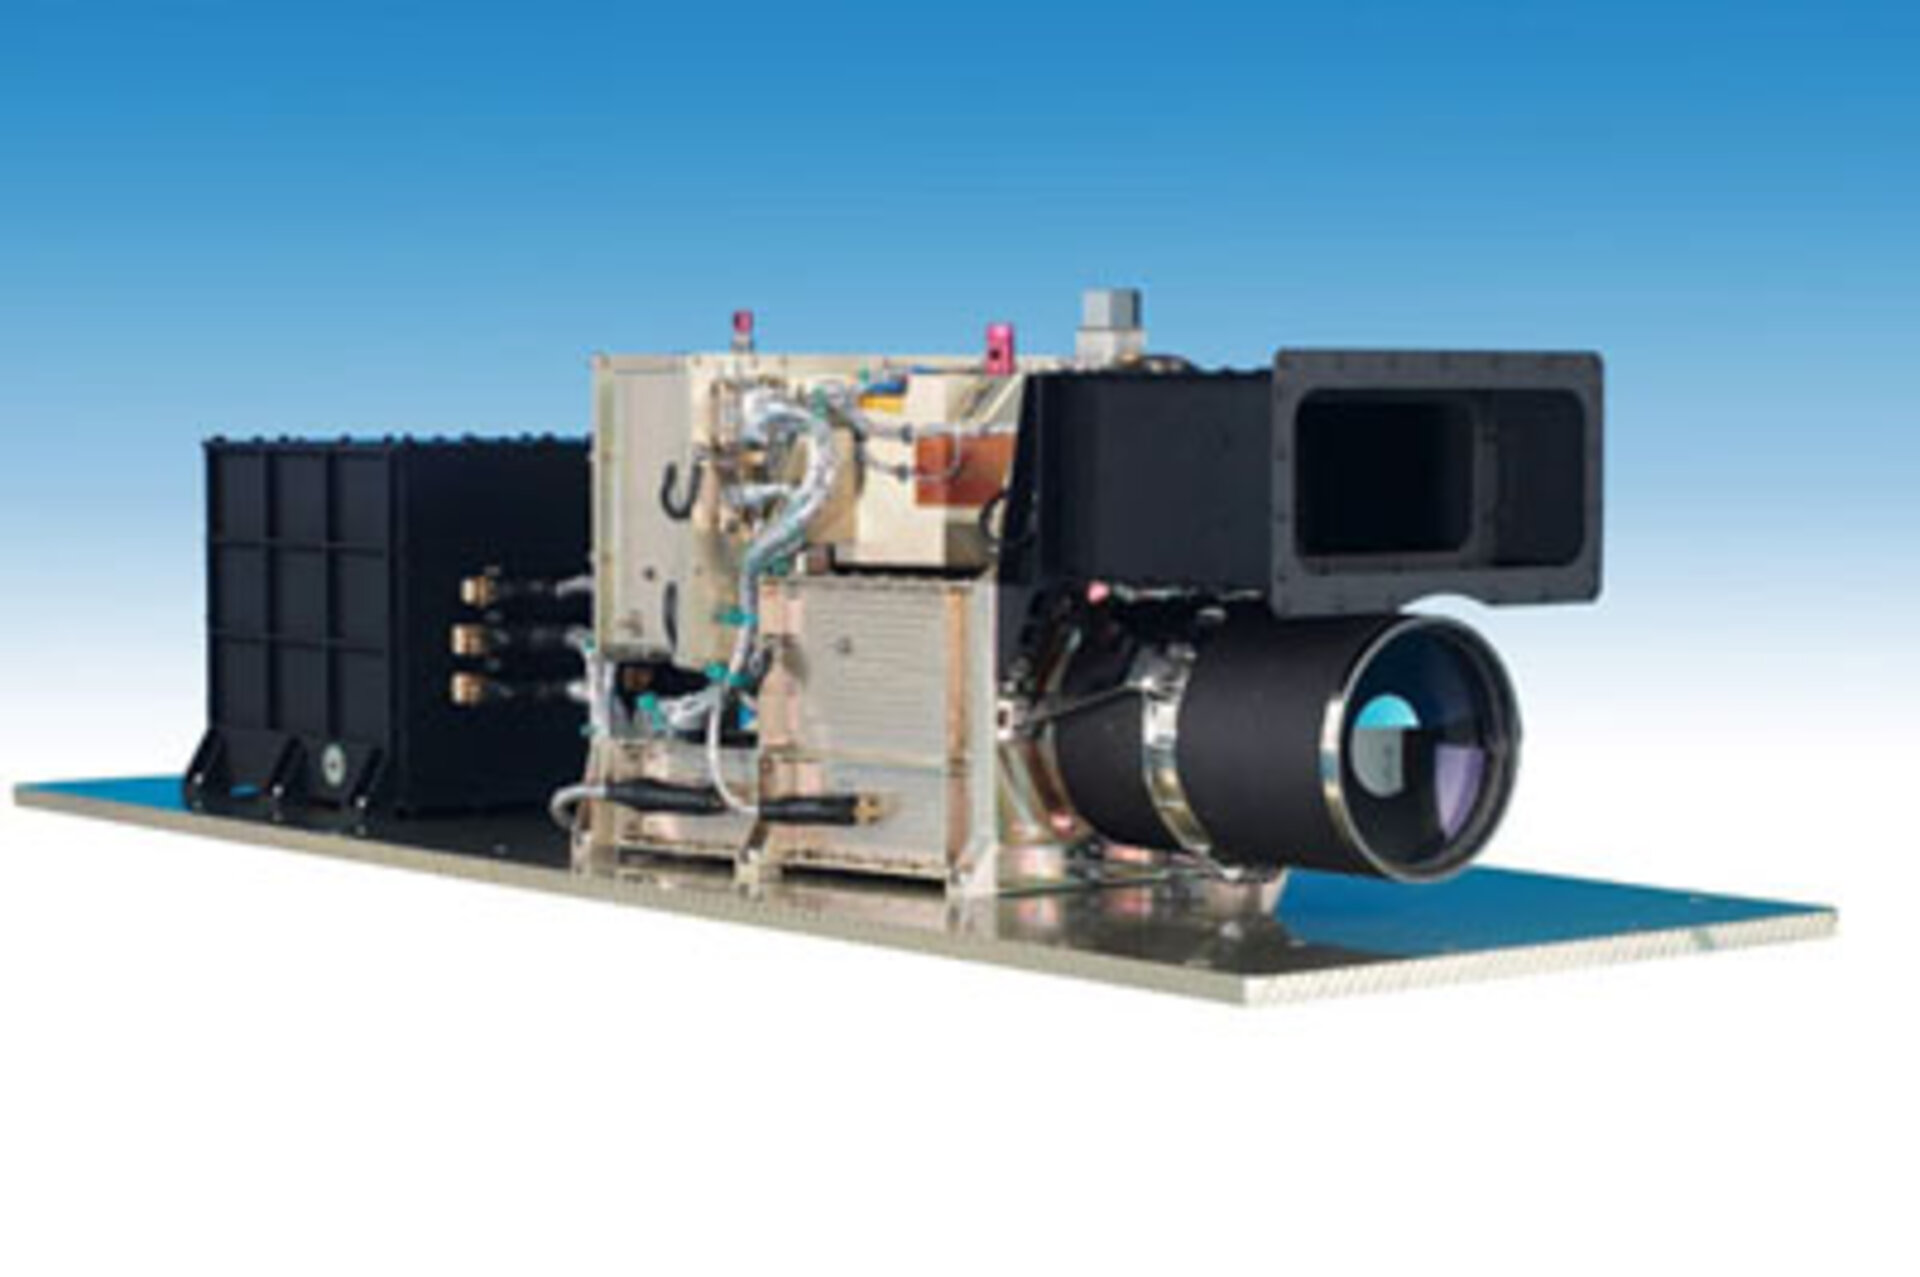 The High Resolution Stereo Camera (HRSC)